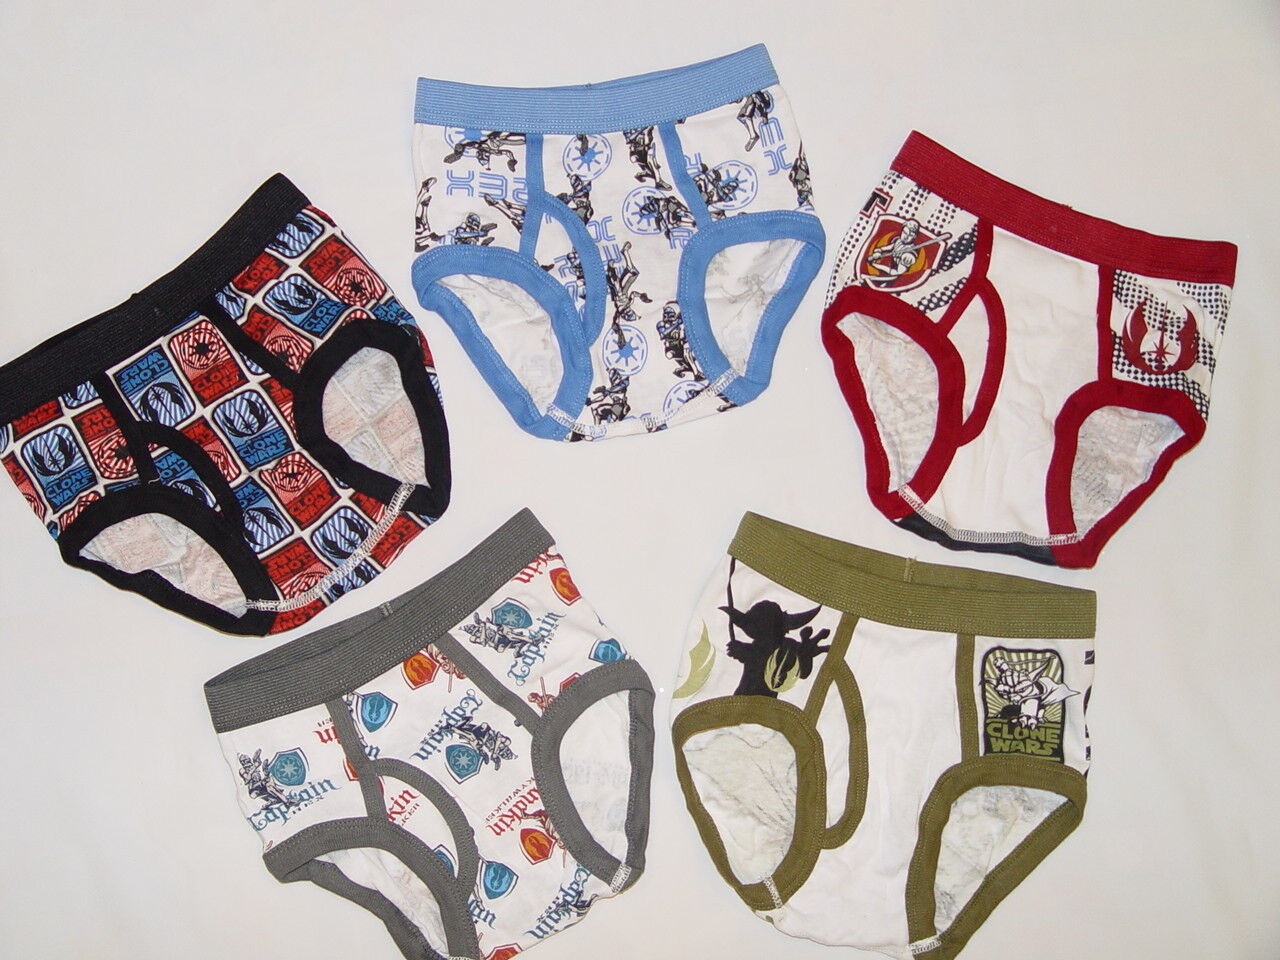 NWT STAR WARS The Colone Wars BOYS' 5 briefs pack underwear size 4 multi  color